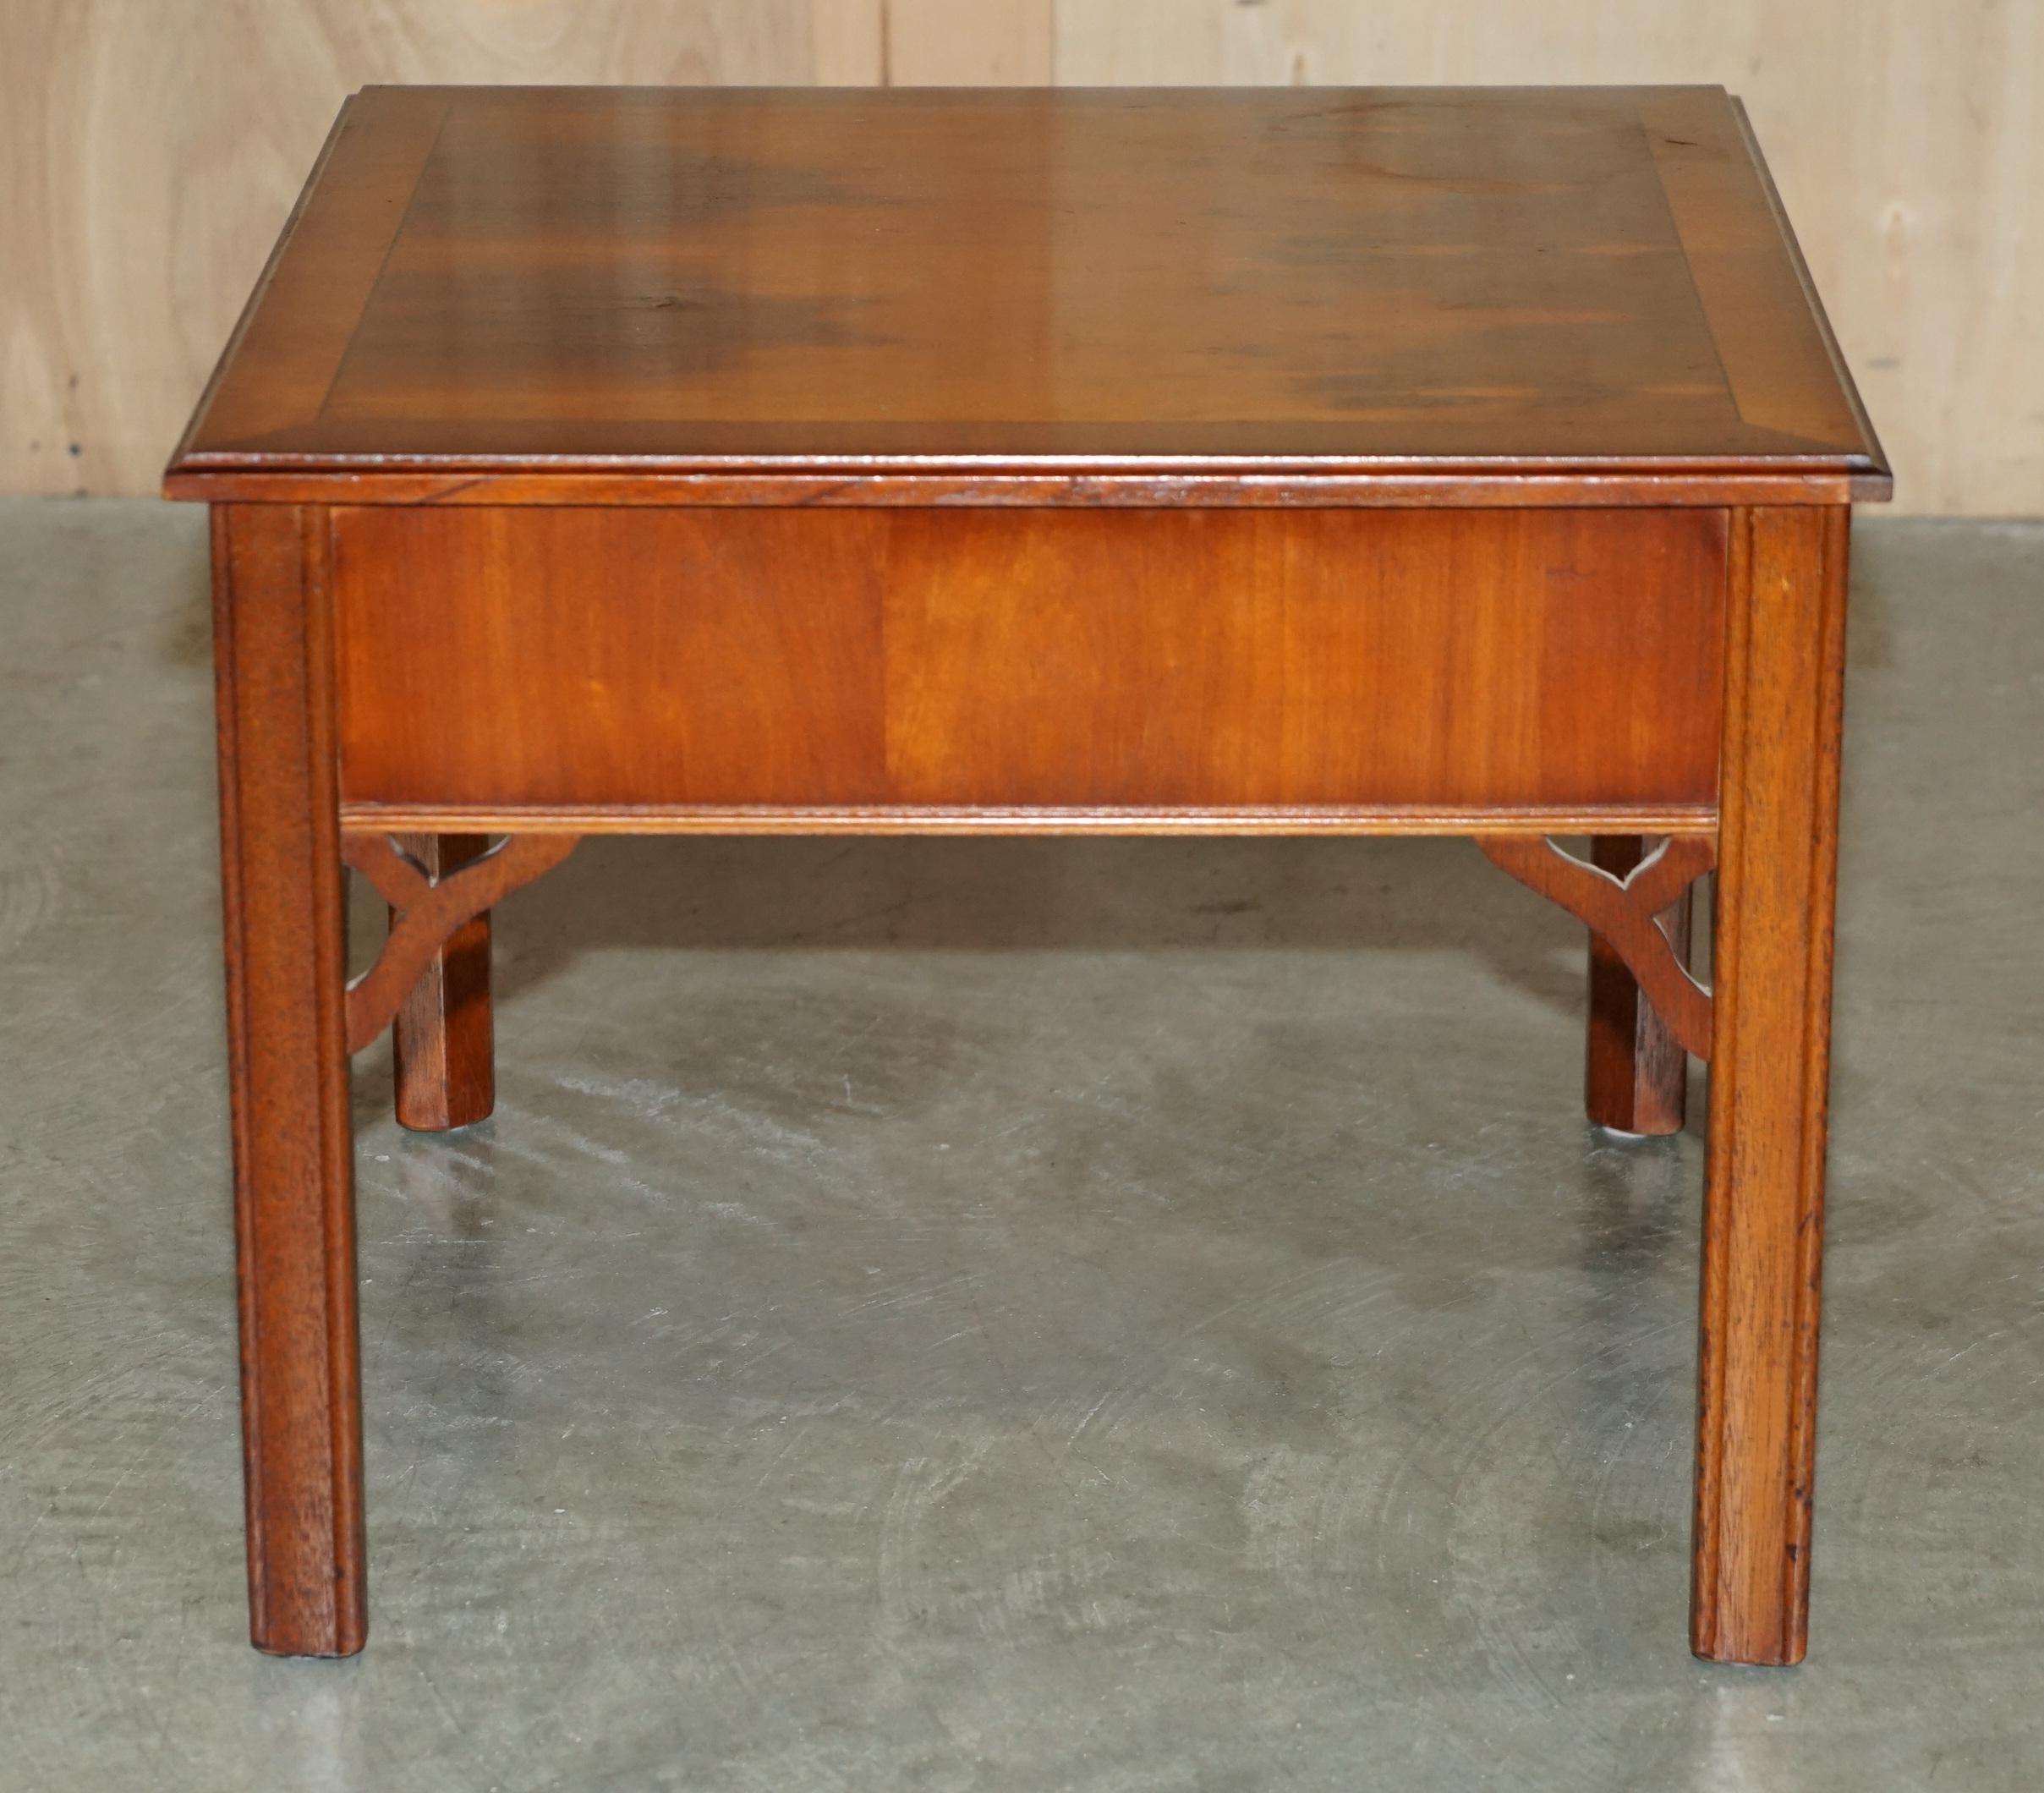 LOVELY PAIR OF BURR YEW WOOD SiDE END LAMP WINE TABLES MIT LARGE SINGLE DRAWERS im Angebot 3